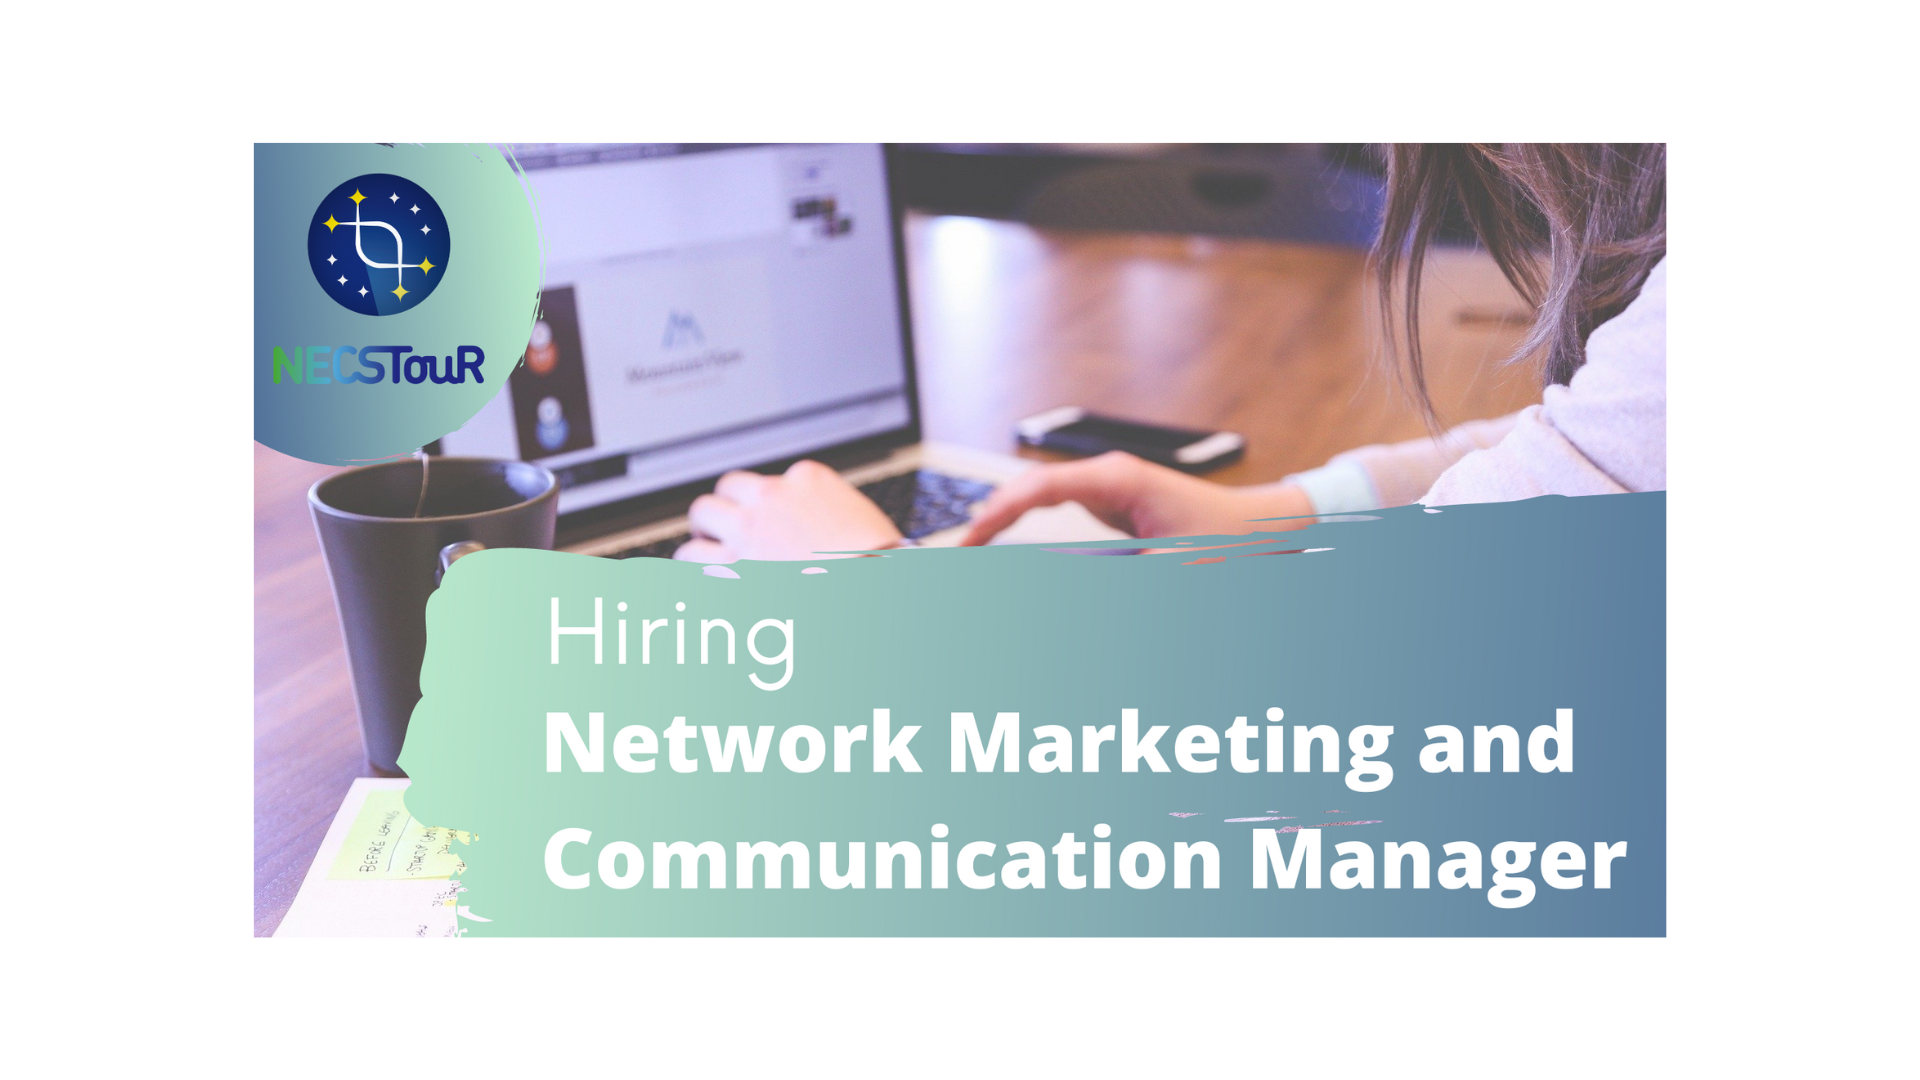 Network Marketing and Communication Manager